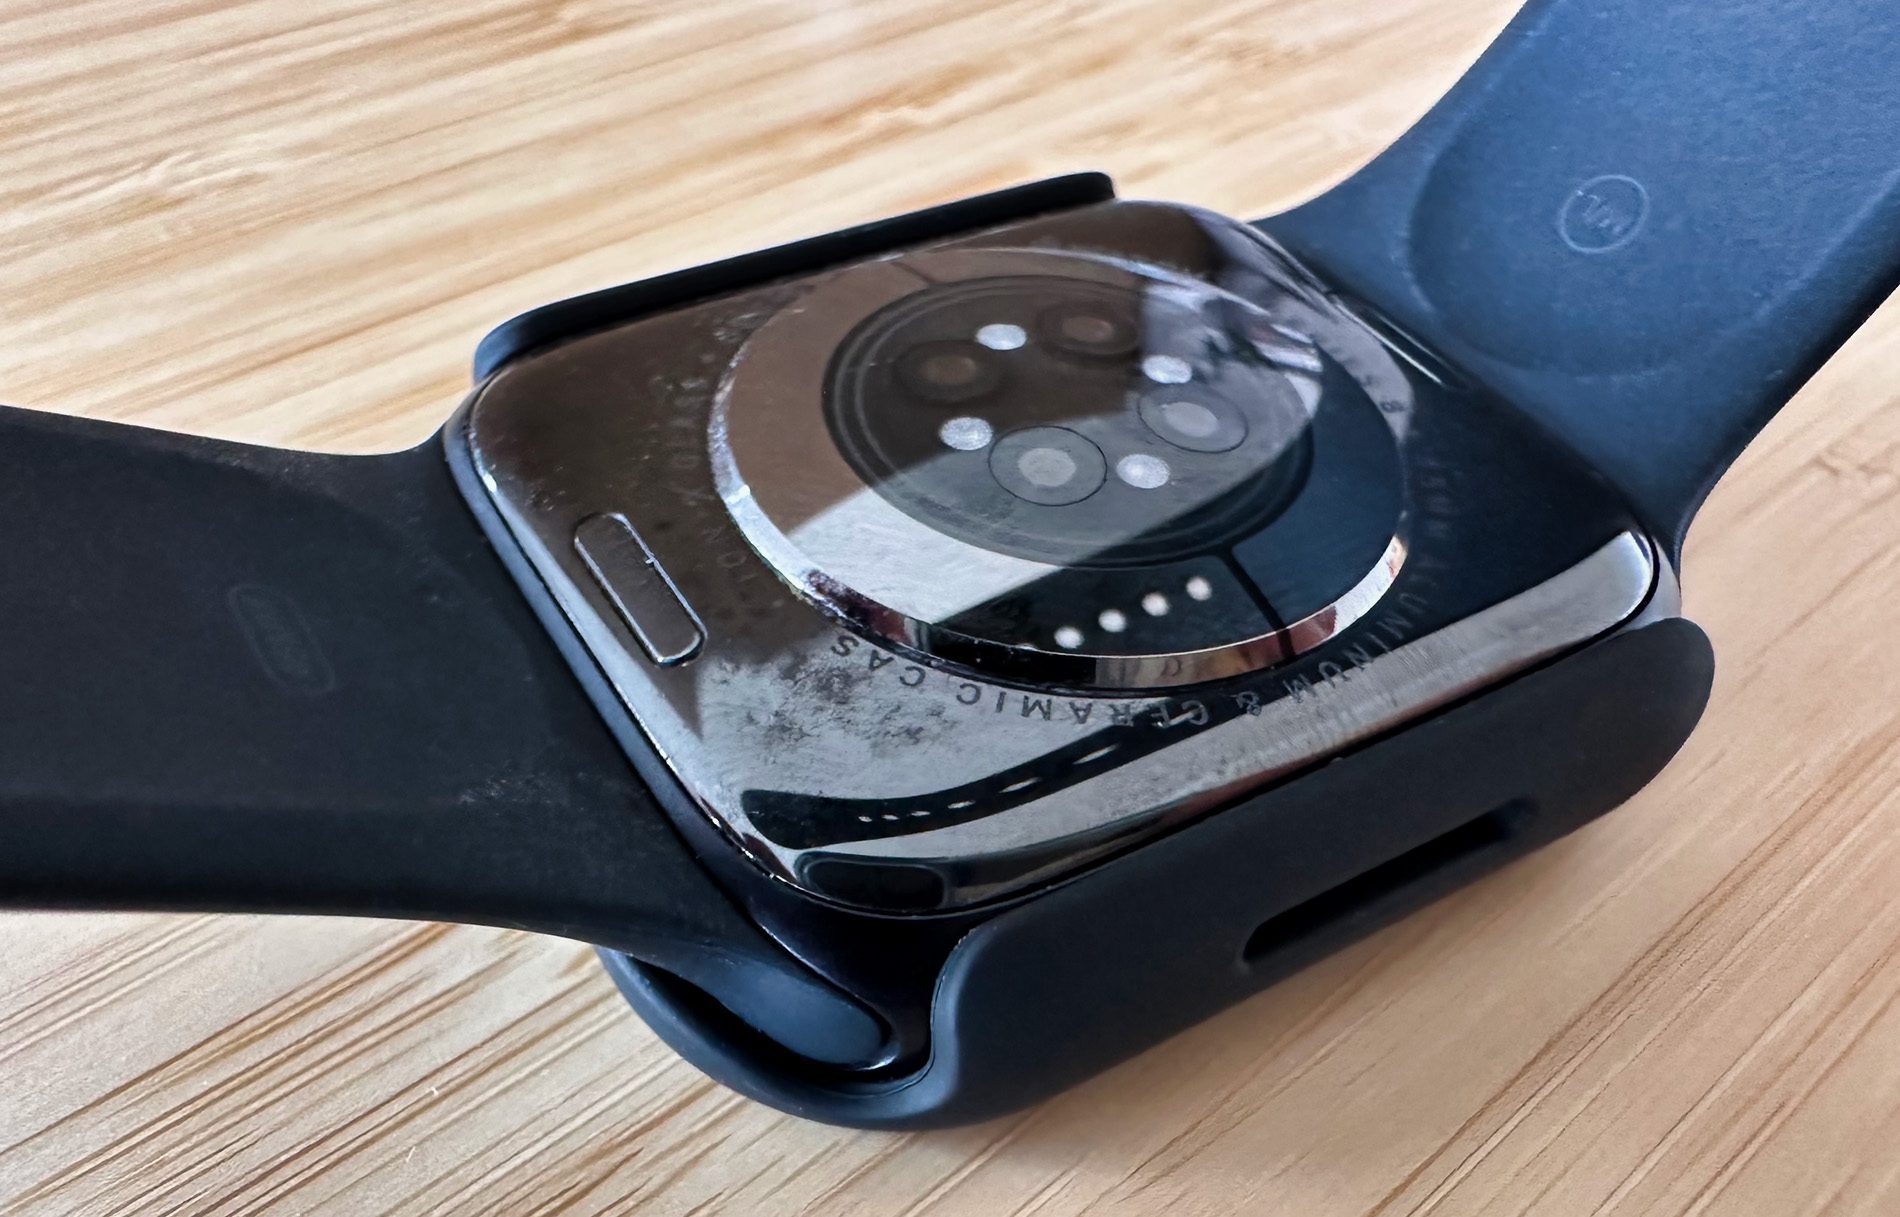 Here you can see the bottom of the Apple Watch with the case on.